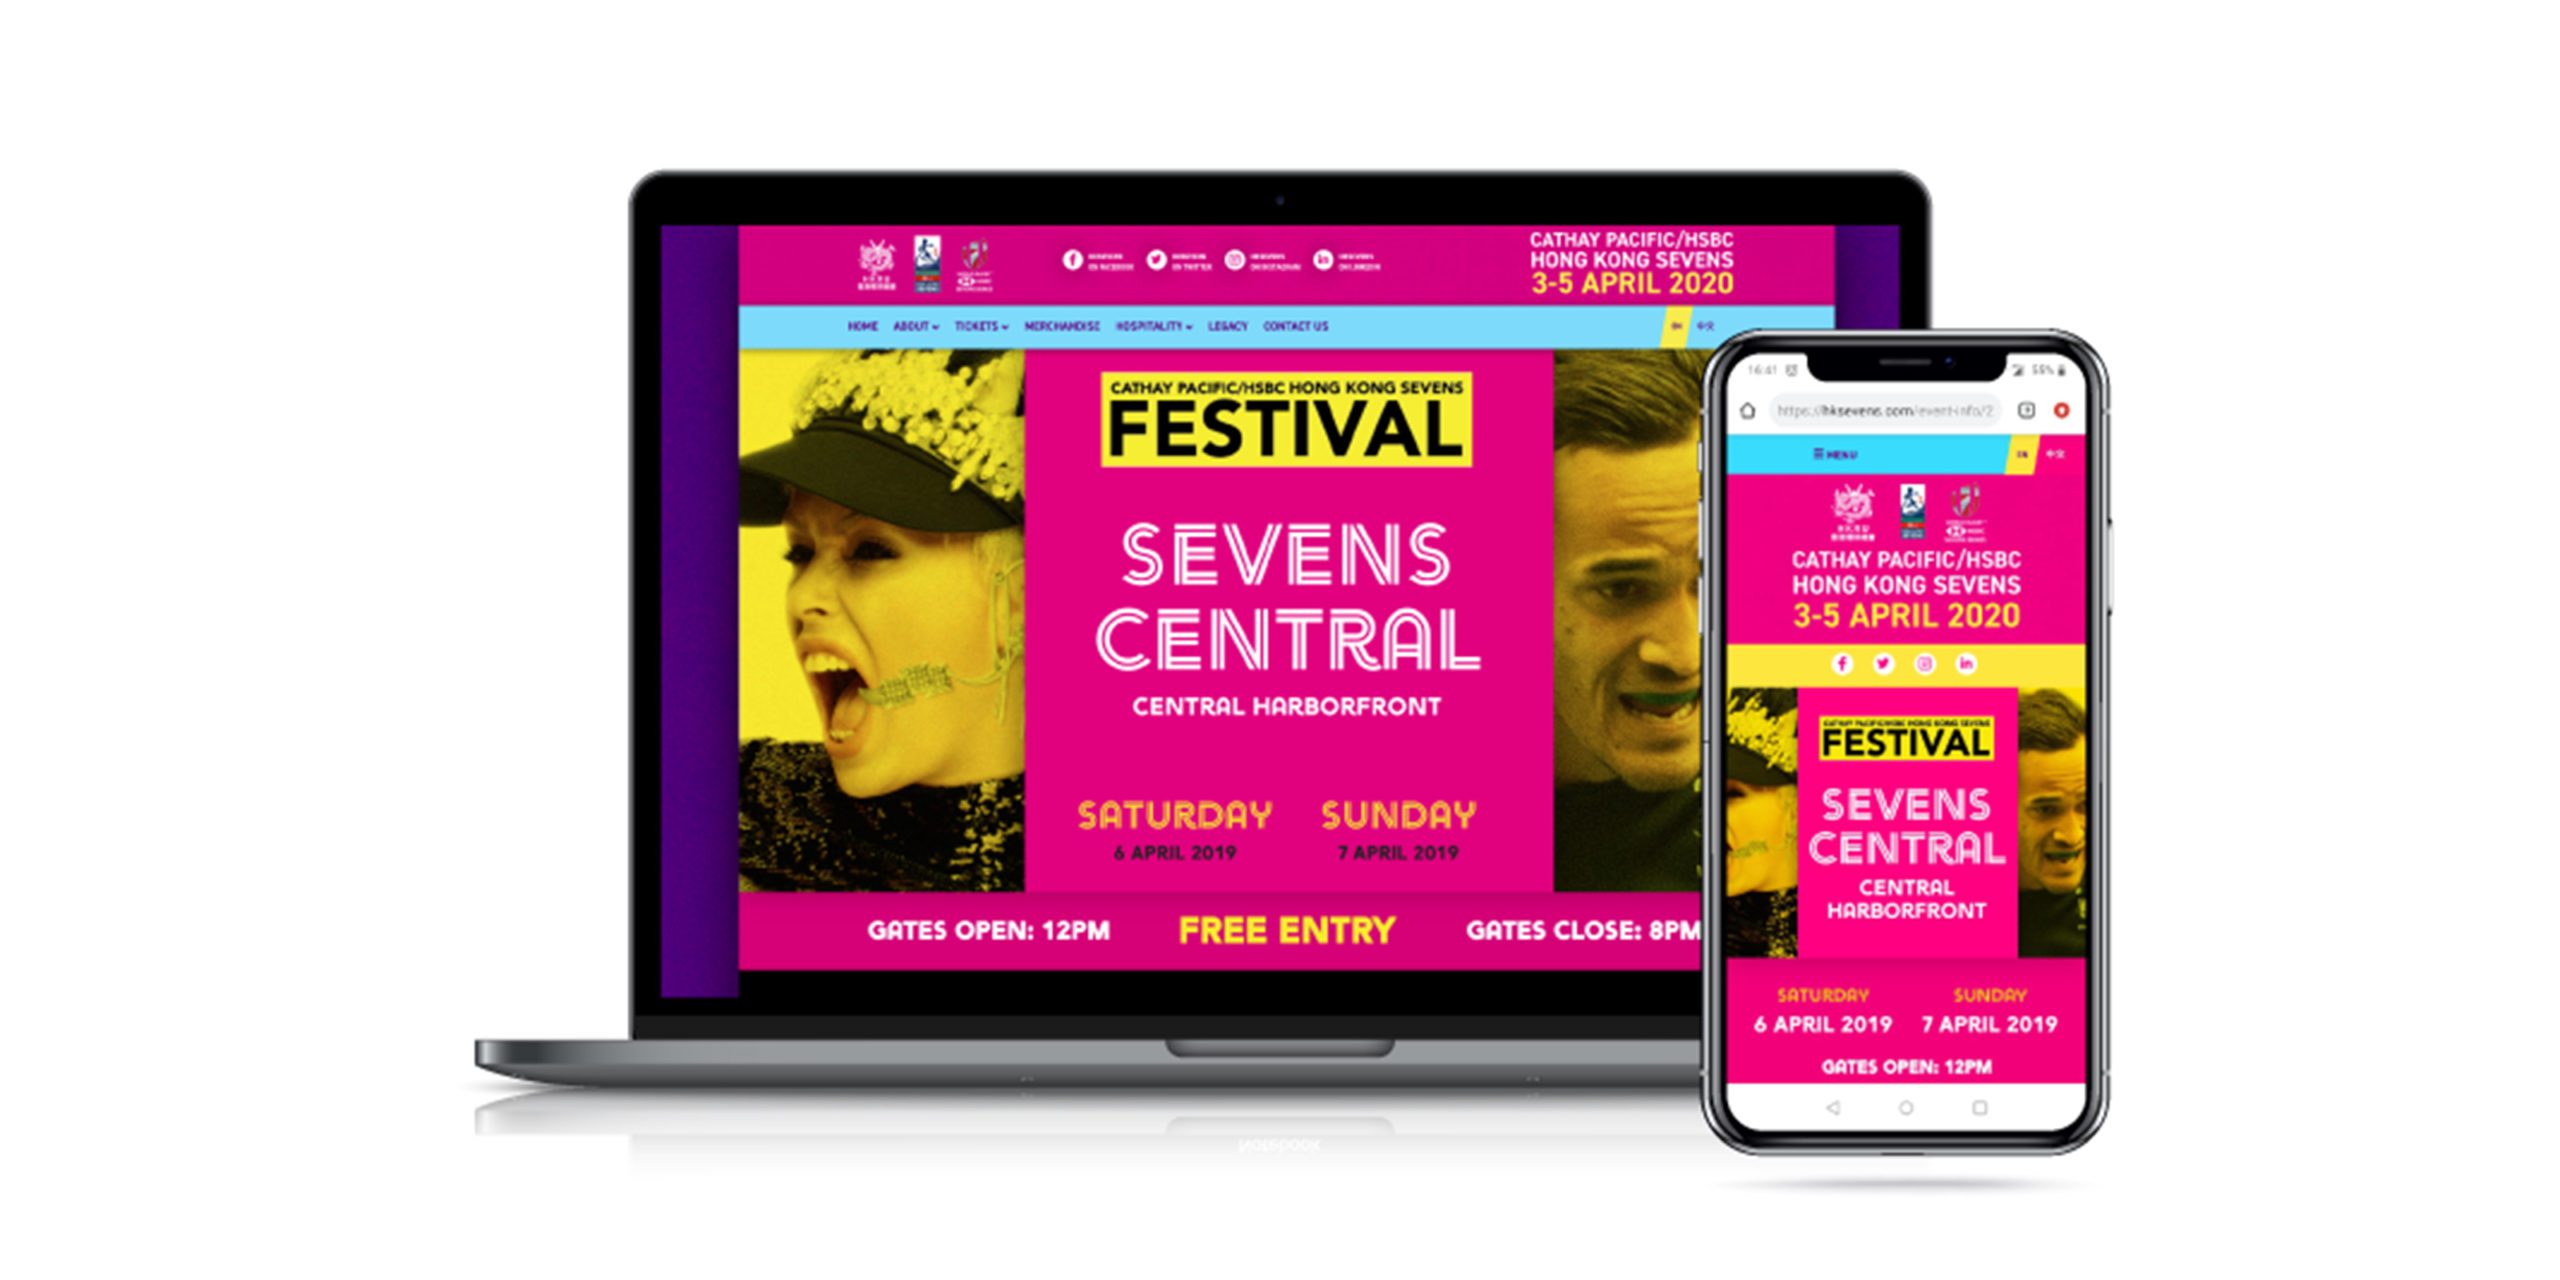 HK Sevens Festival website shown on iPhone and MacBook screen